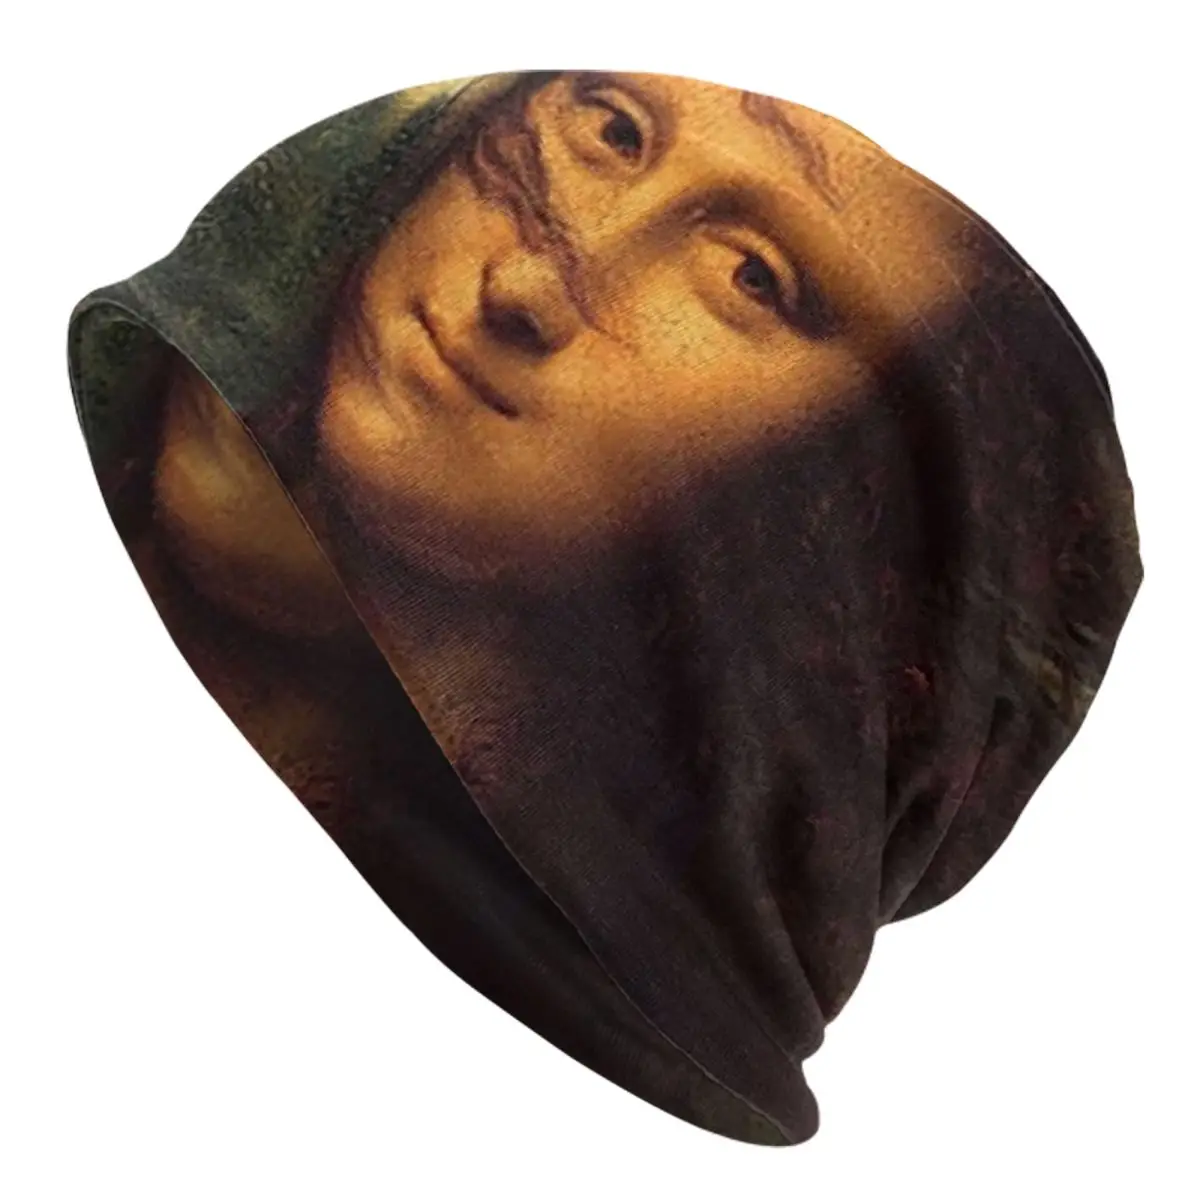 Funny Mona Lisa Wind In Hair Adult Men's Women's Knit Hat Keep warm winter Funny knitted hat